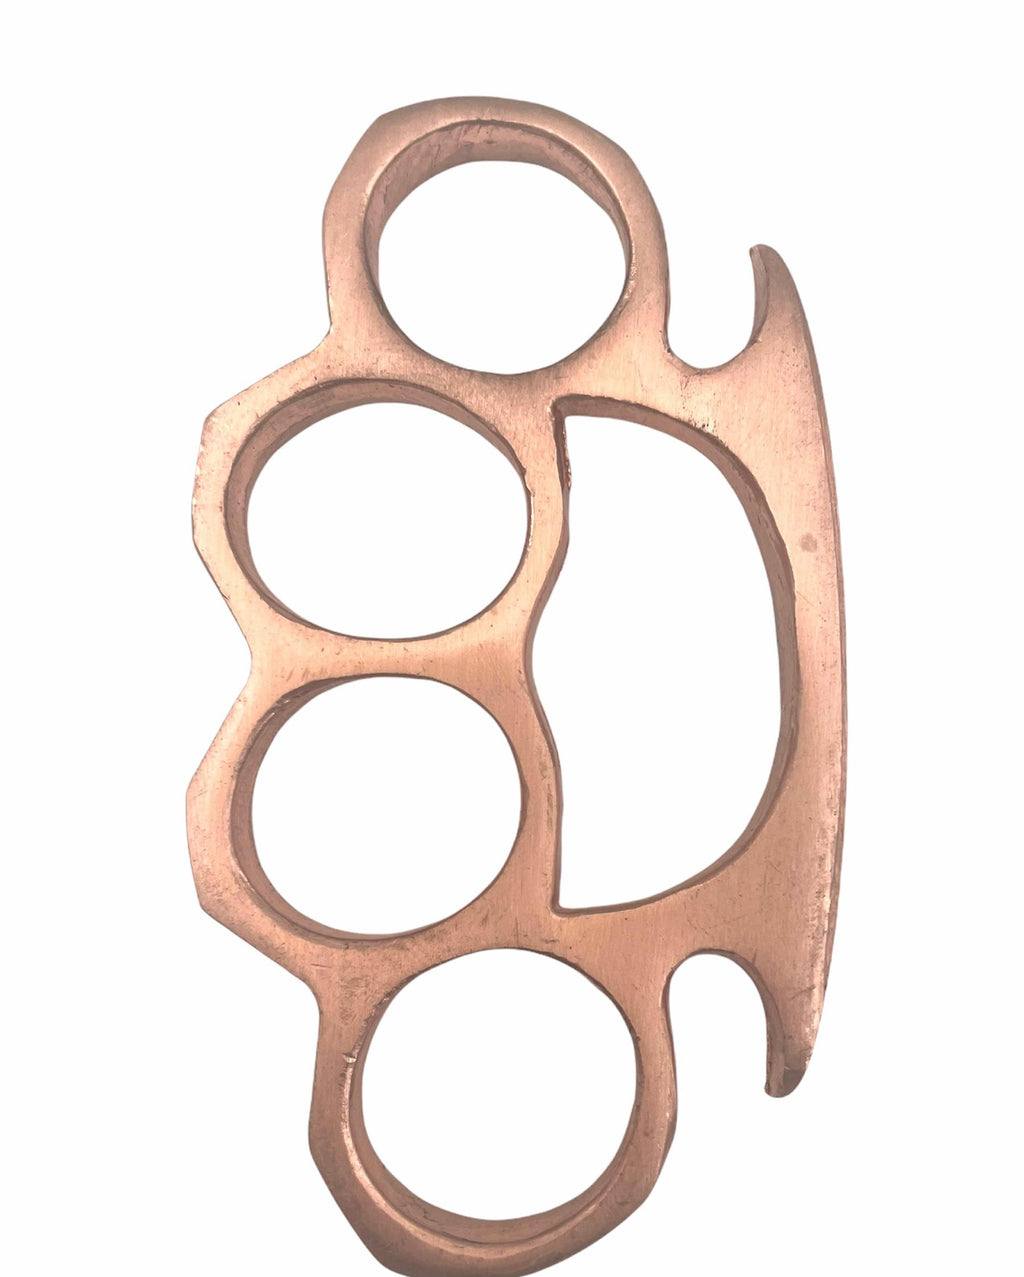 Solid Steel Knuckle Duster Brass Knuckle - COPPER